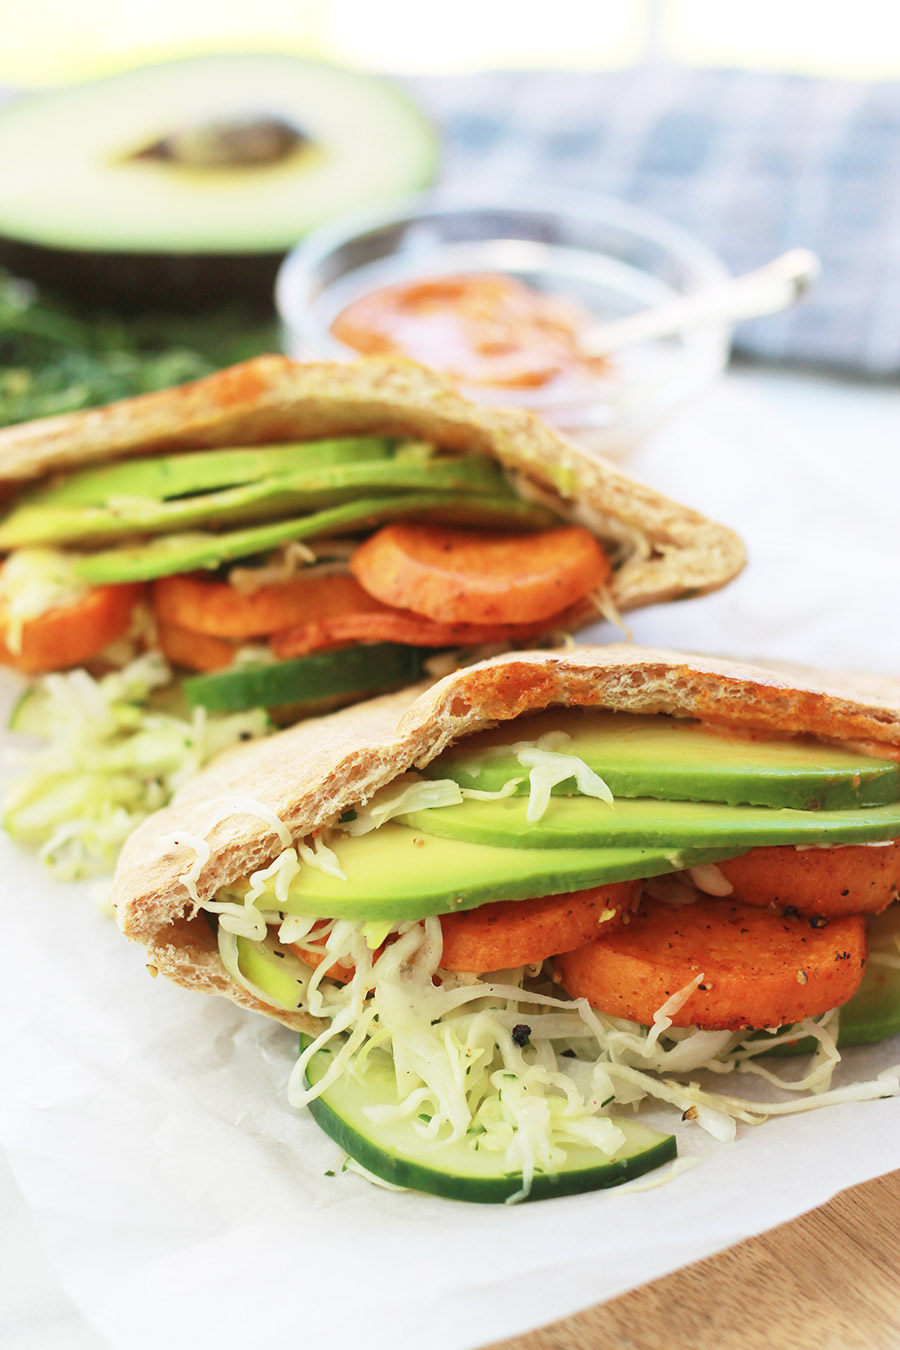 Pita pocket stuffed with spicy roasted sweet potato slices, cucumber slaw and avocado slices, with half of an avocado slice and sandwich spread in background.